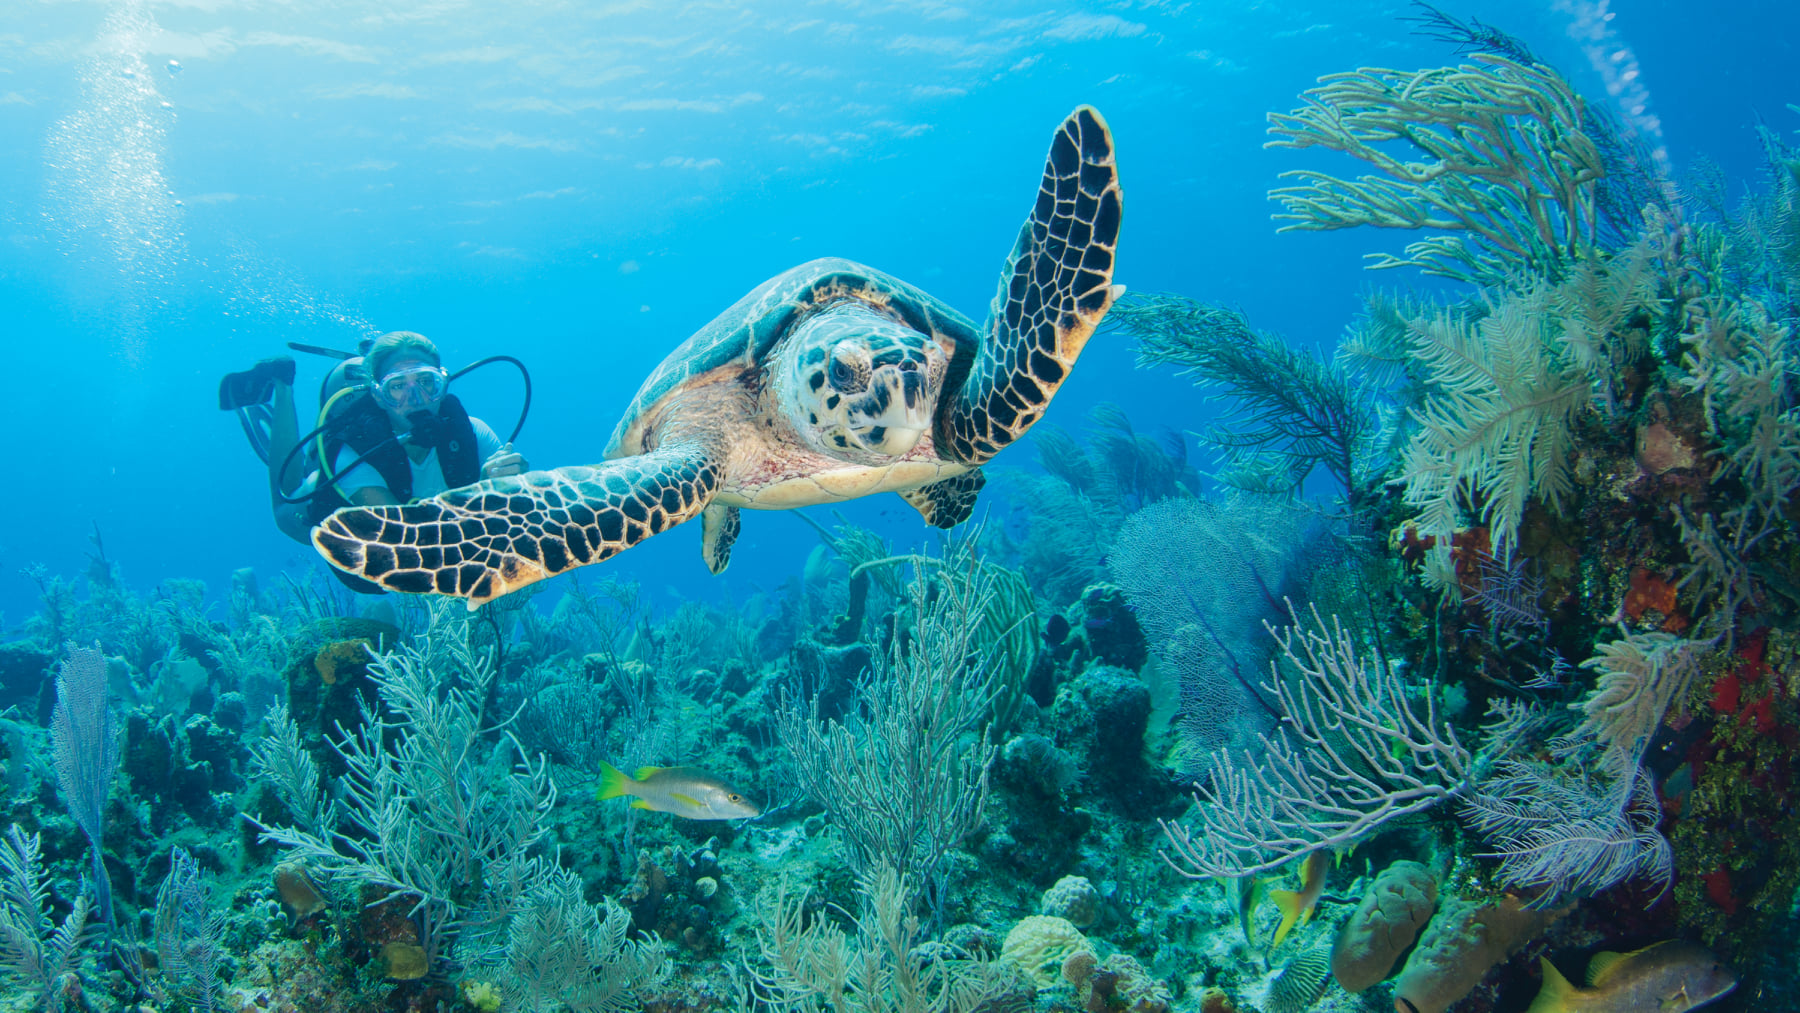 From swimming with wild stingrays to eating your way across the Caribbean’s culinary capital, the Cayman Islands has an experience to thrill everyone.